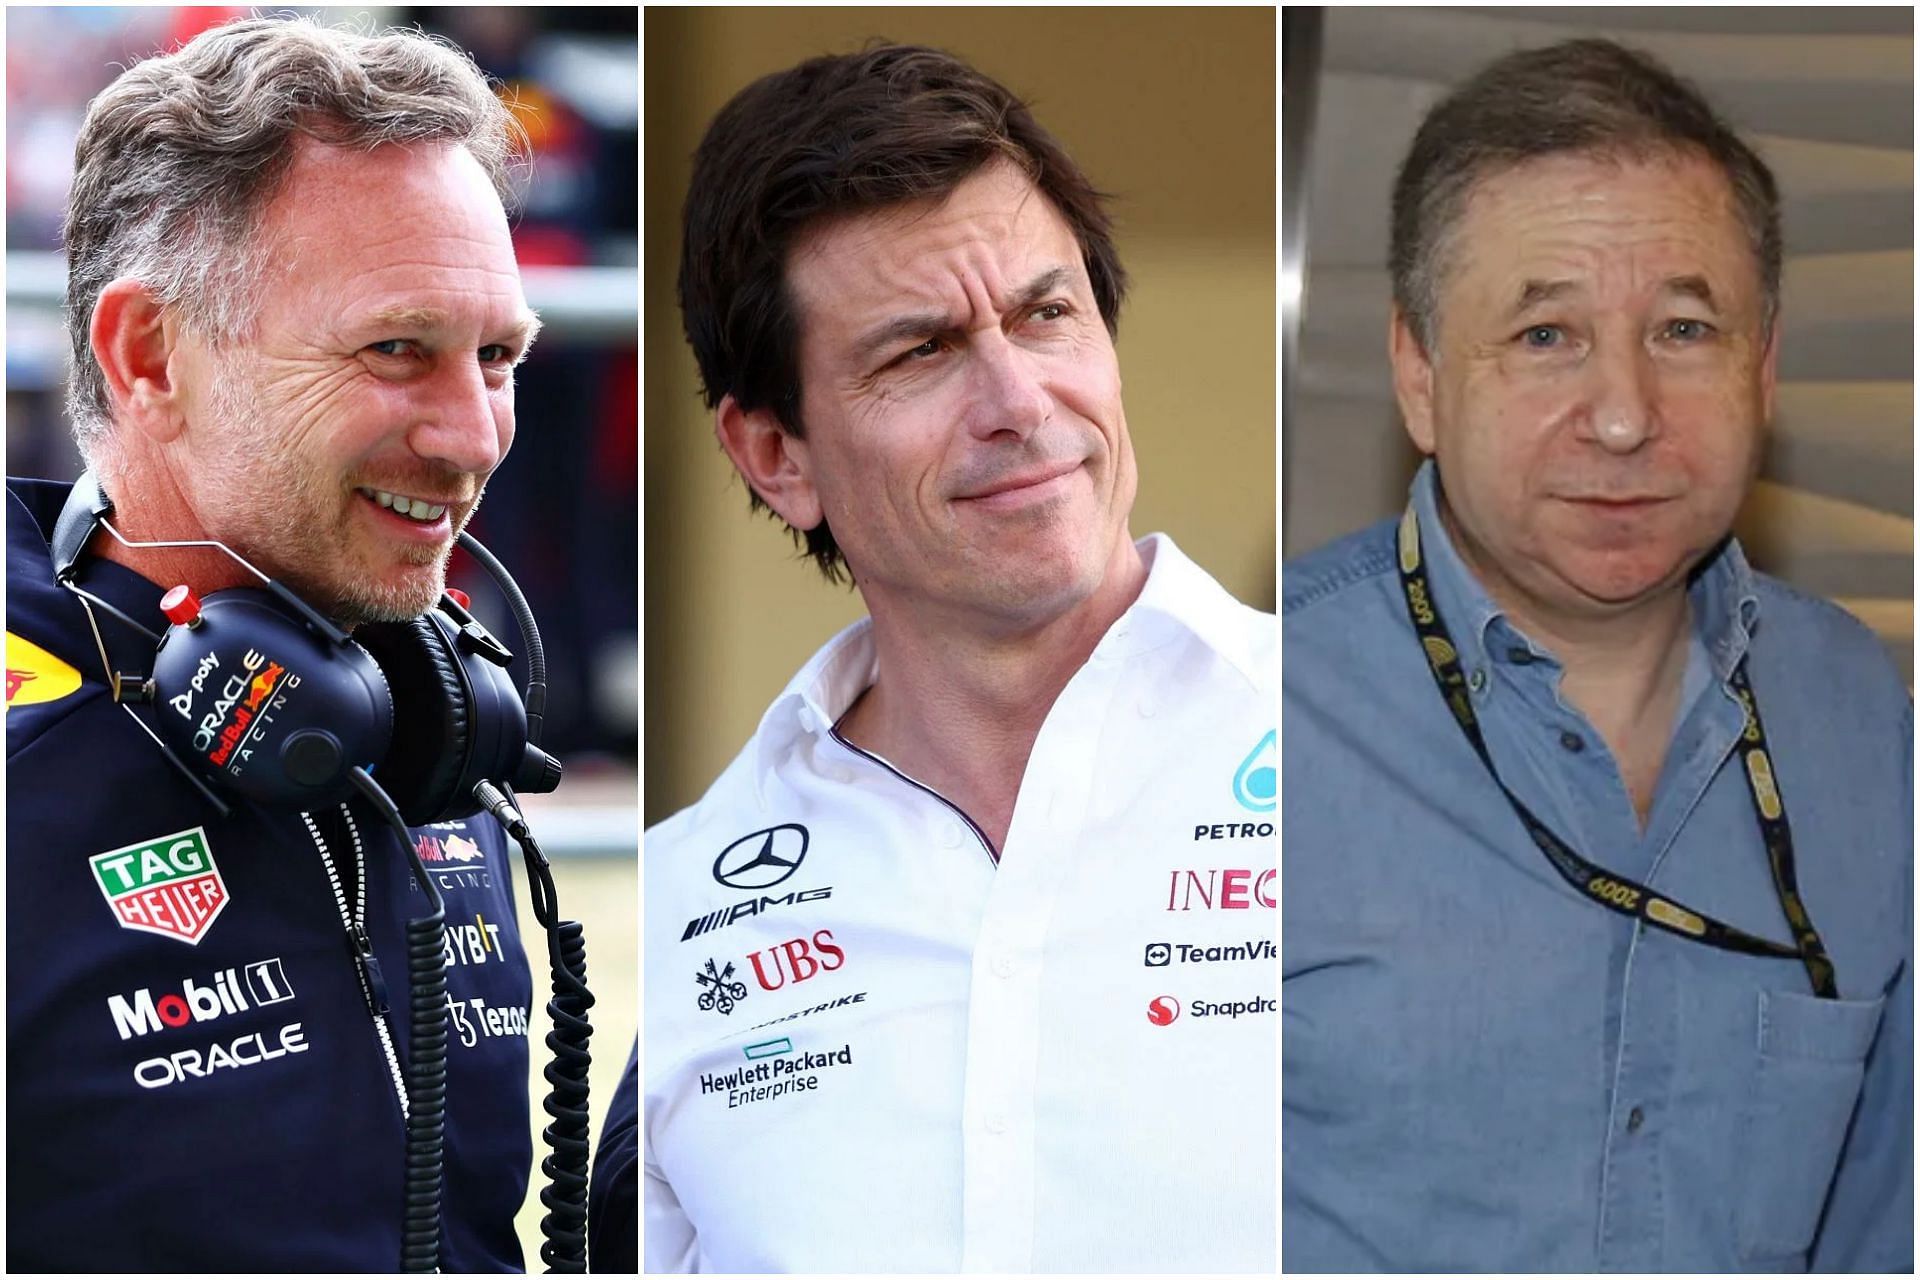 Christian Horner (L), Toto Wolff (C), and Jean Todt (R) (Collage via Sportskeeda)